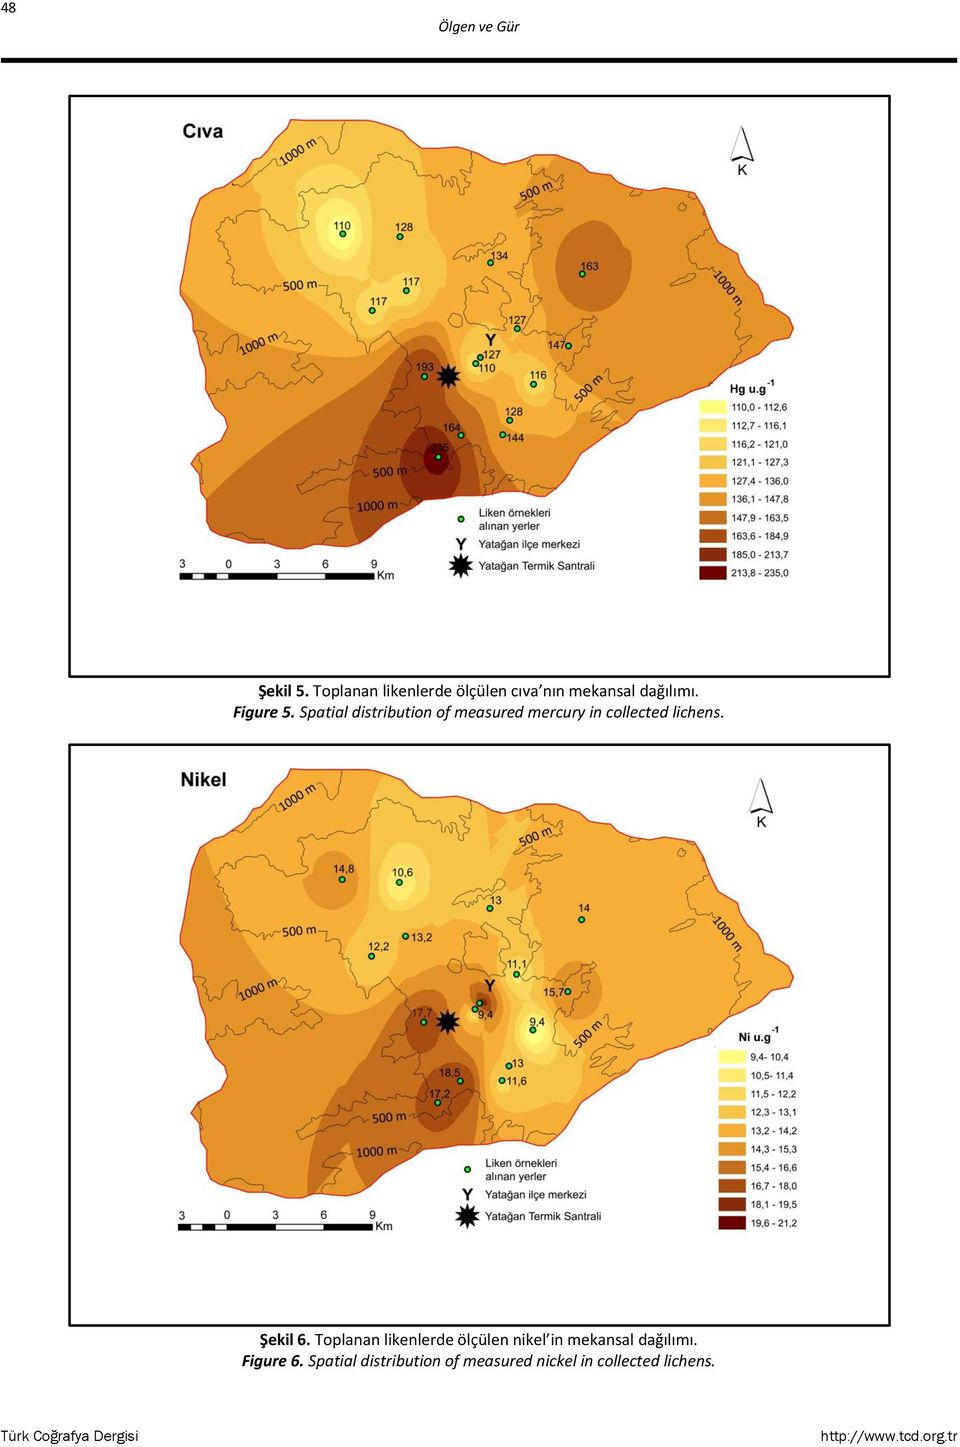 Spatial distribution of measured mercury in collected lichens. Şekil 6.